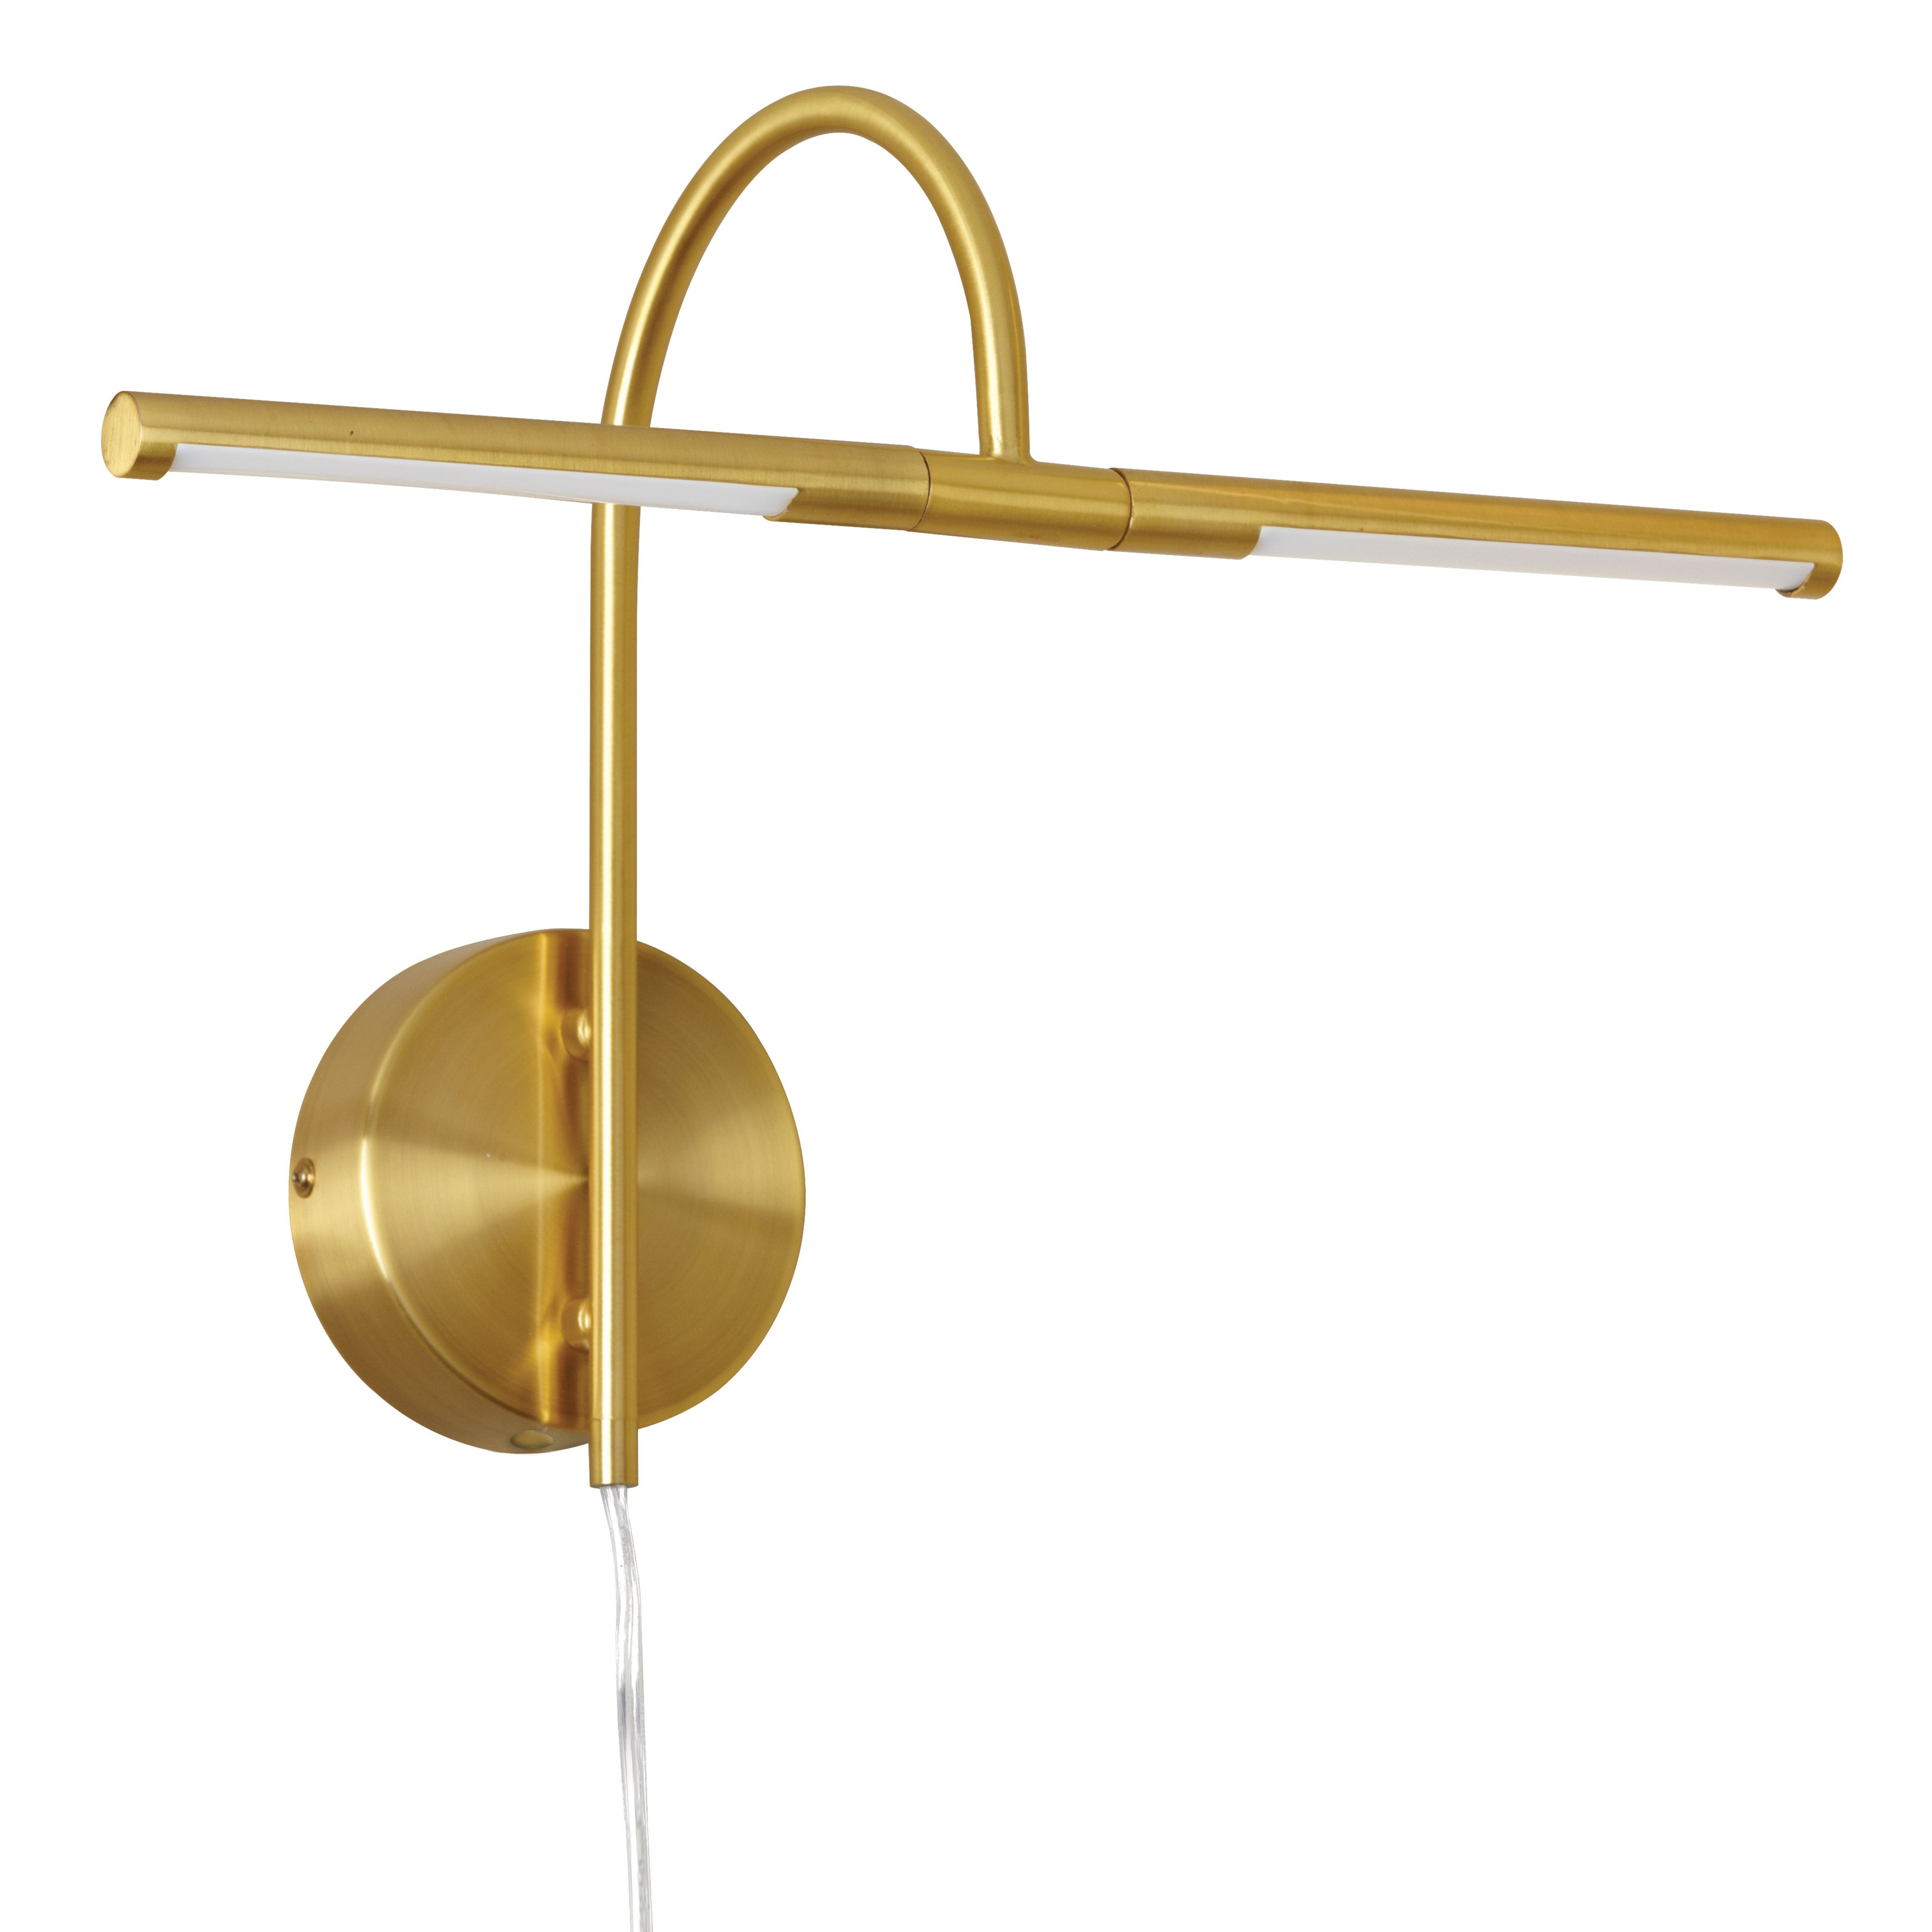 DISPLAY/EXHIBIT Wall sconce à tableau Gold INTEGRATED LED - PICLED-152-AGB | DAINOLITE